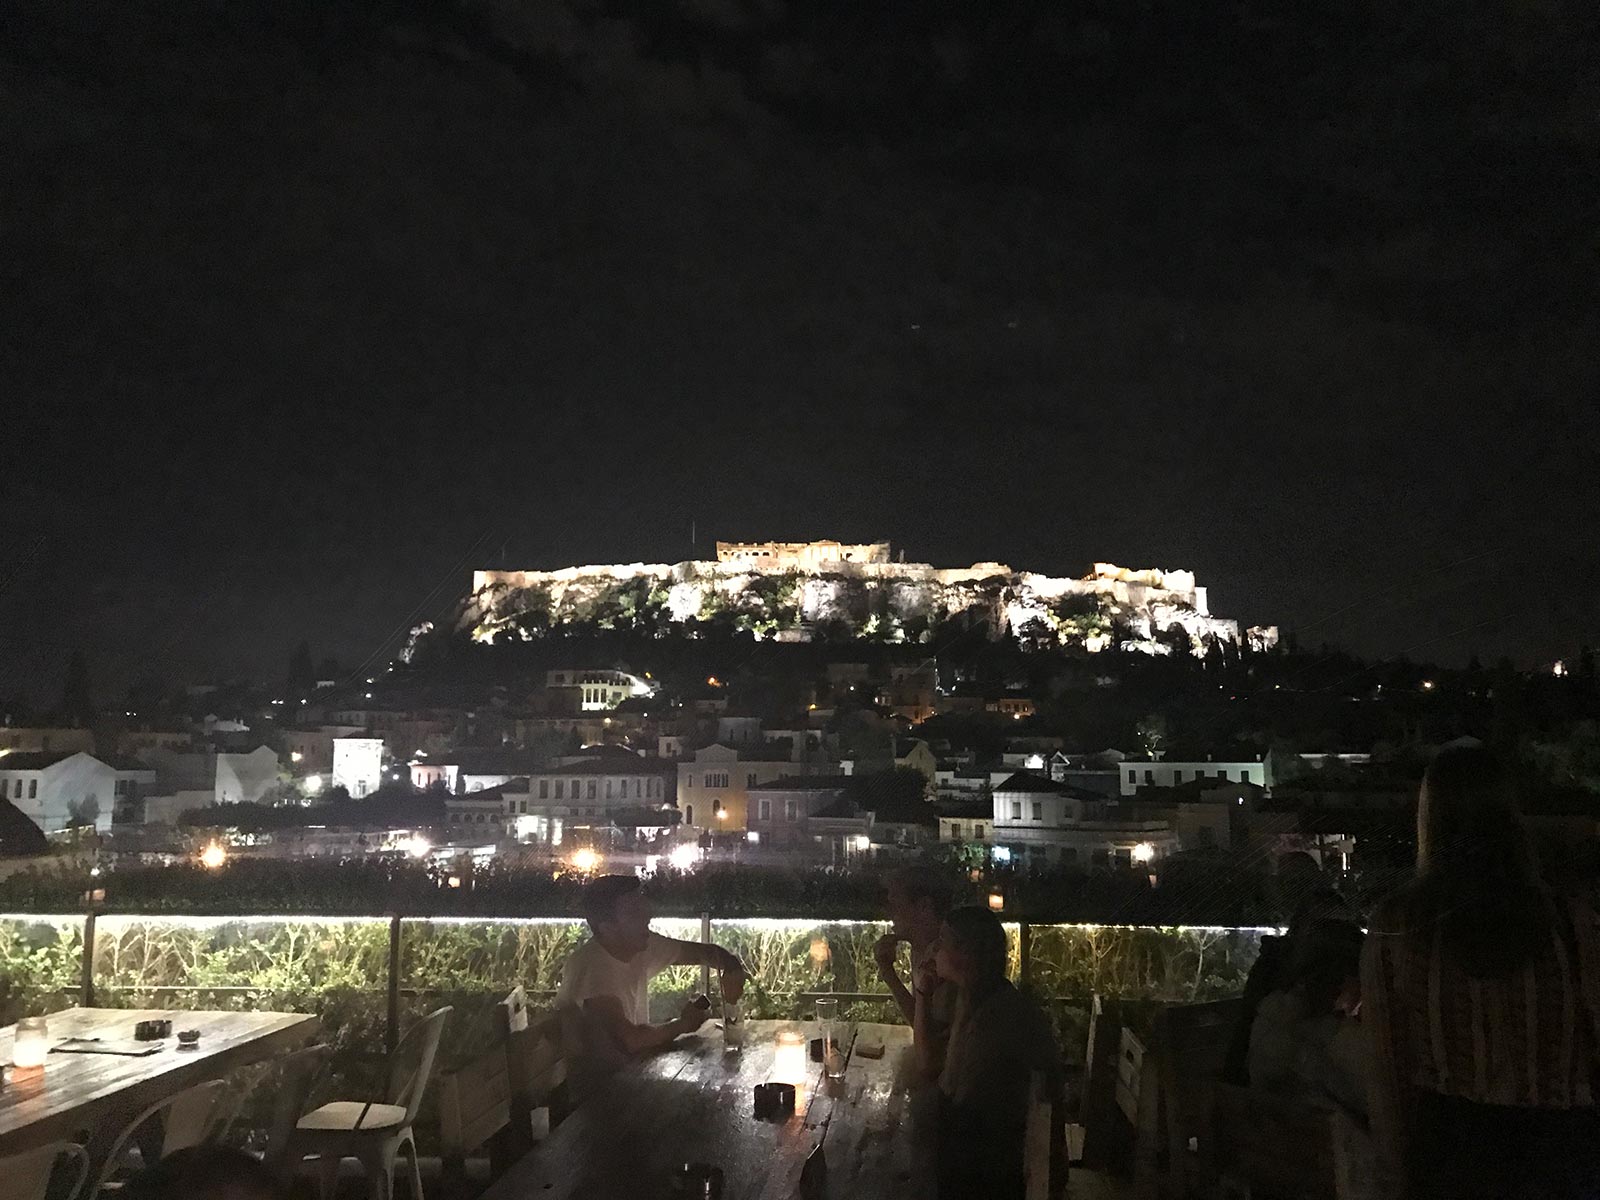 Acropolis at night in Athens, Greece. Athens has me